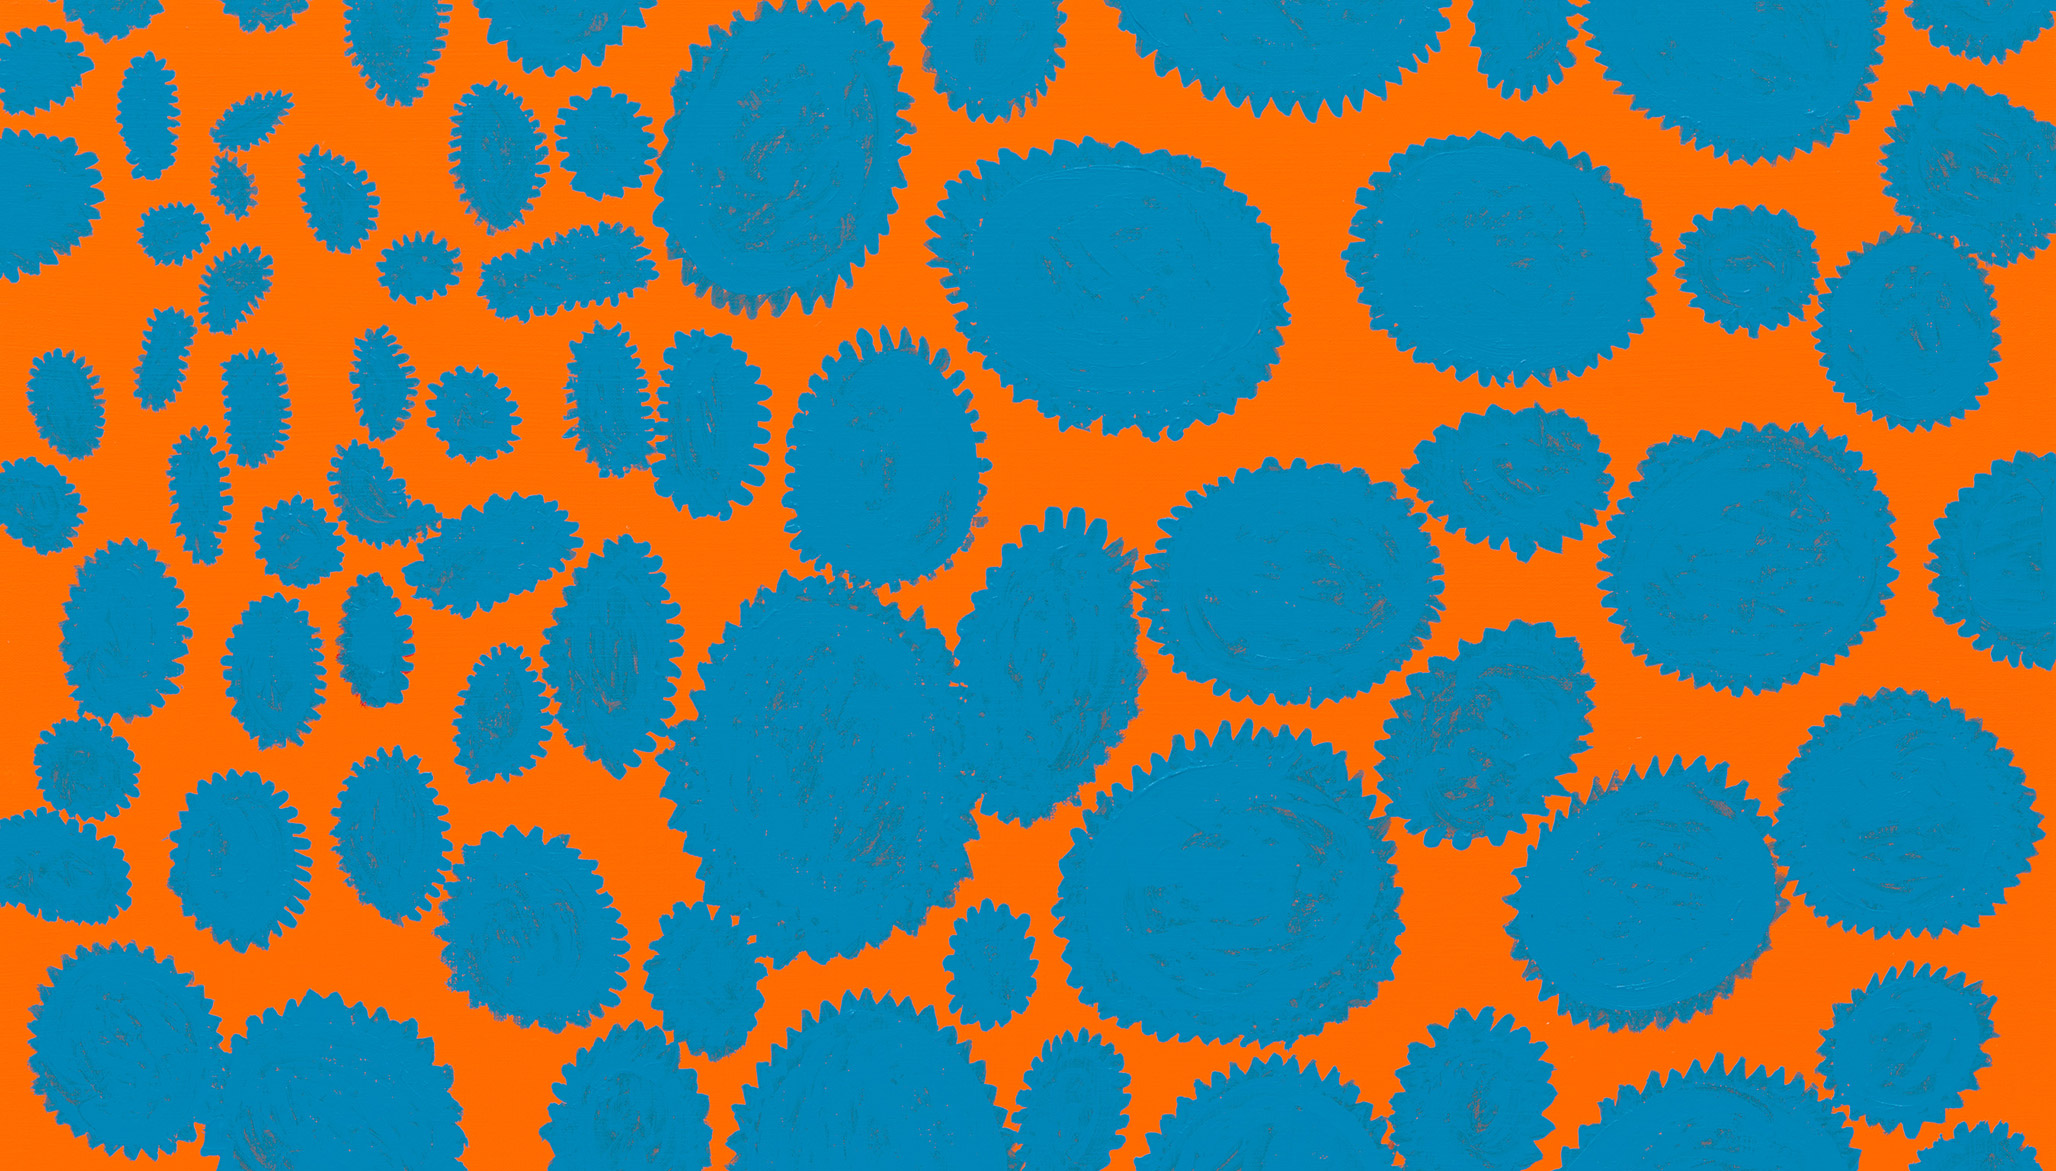 A detail from a painting by Yayoi Kusama, titled SPLENDOR OF STARS CHANGING INTO BLUE, dated 2019.